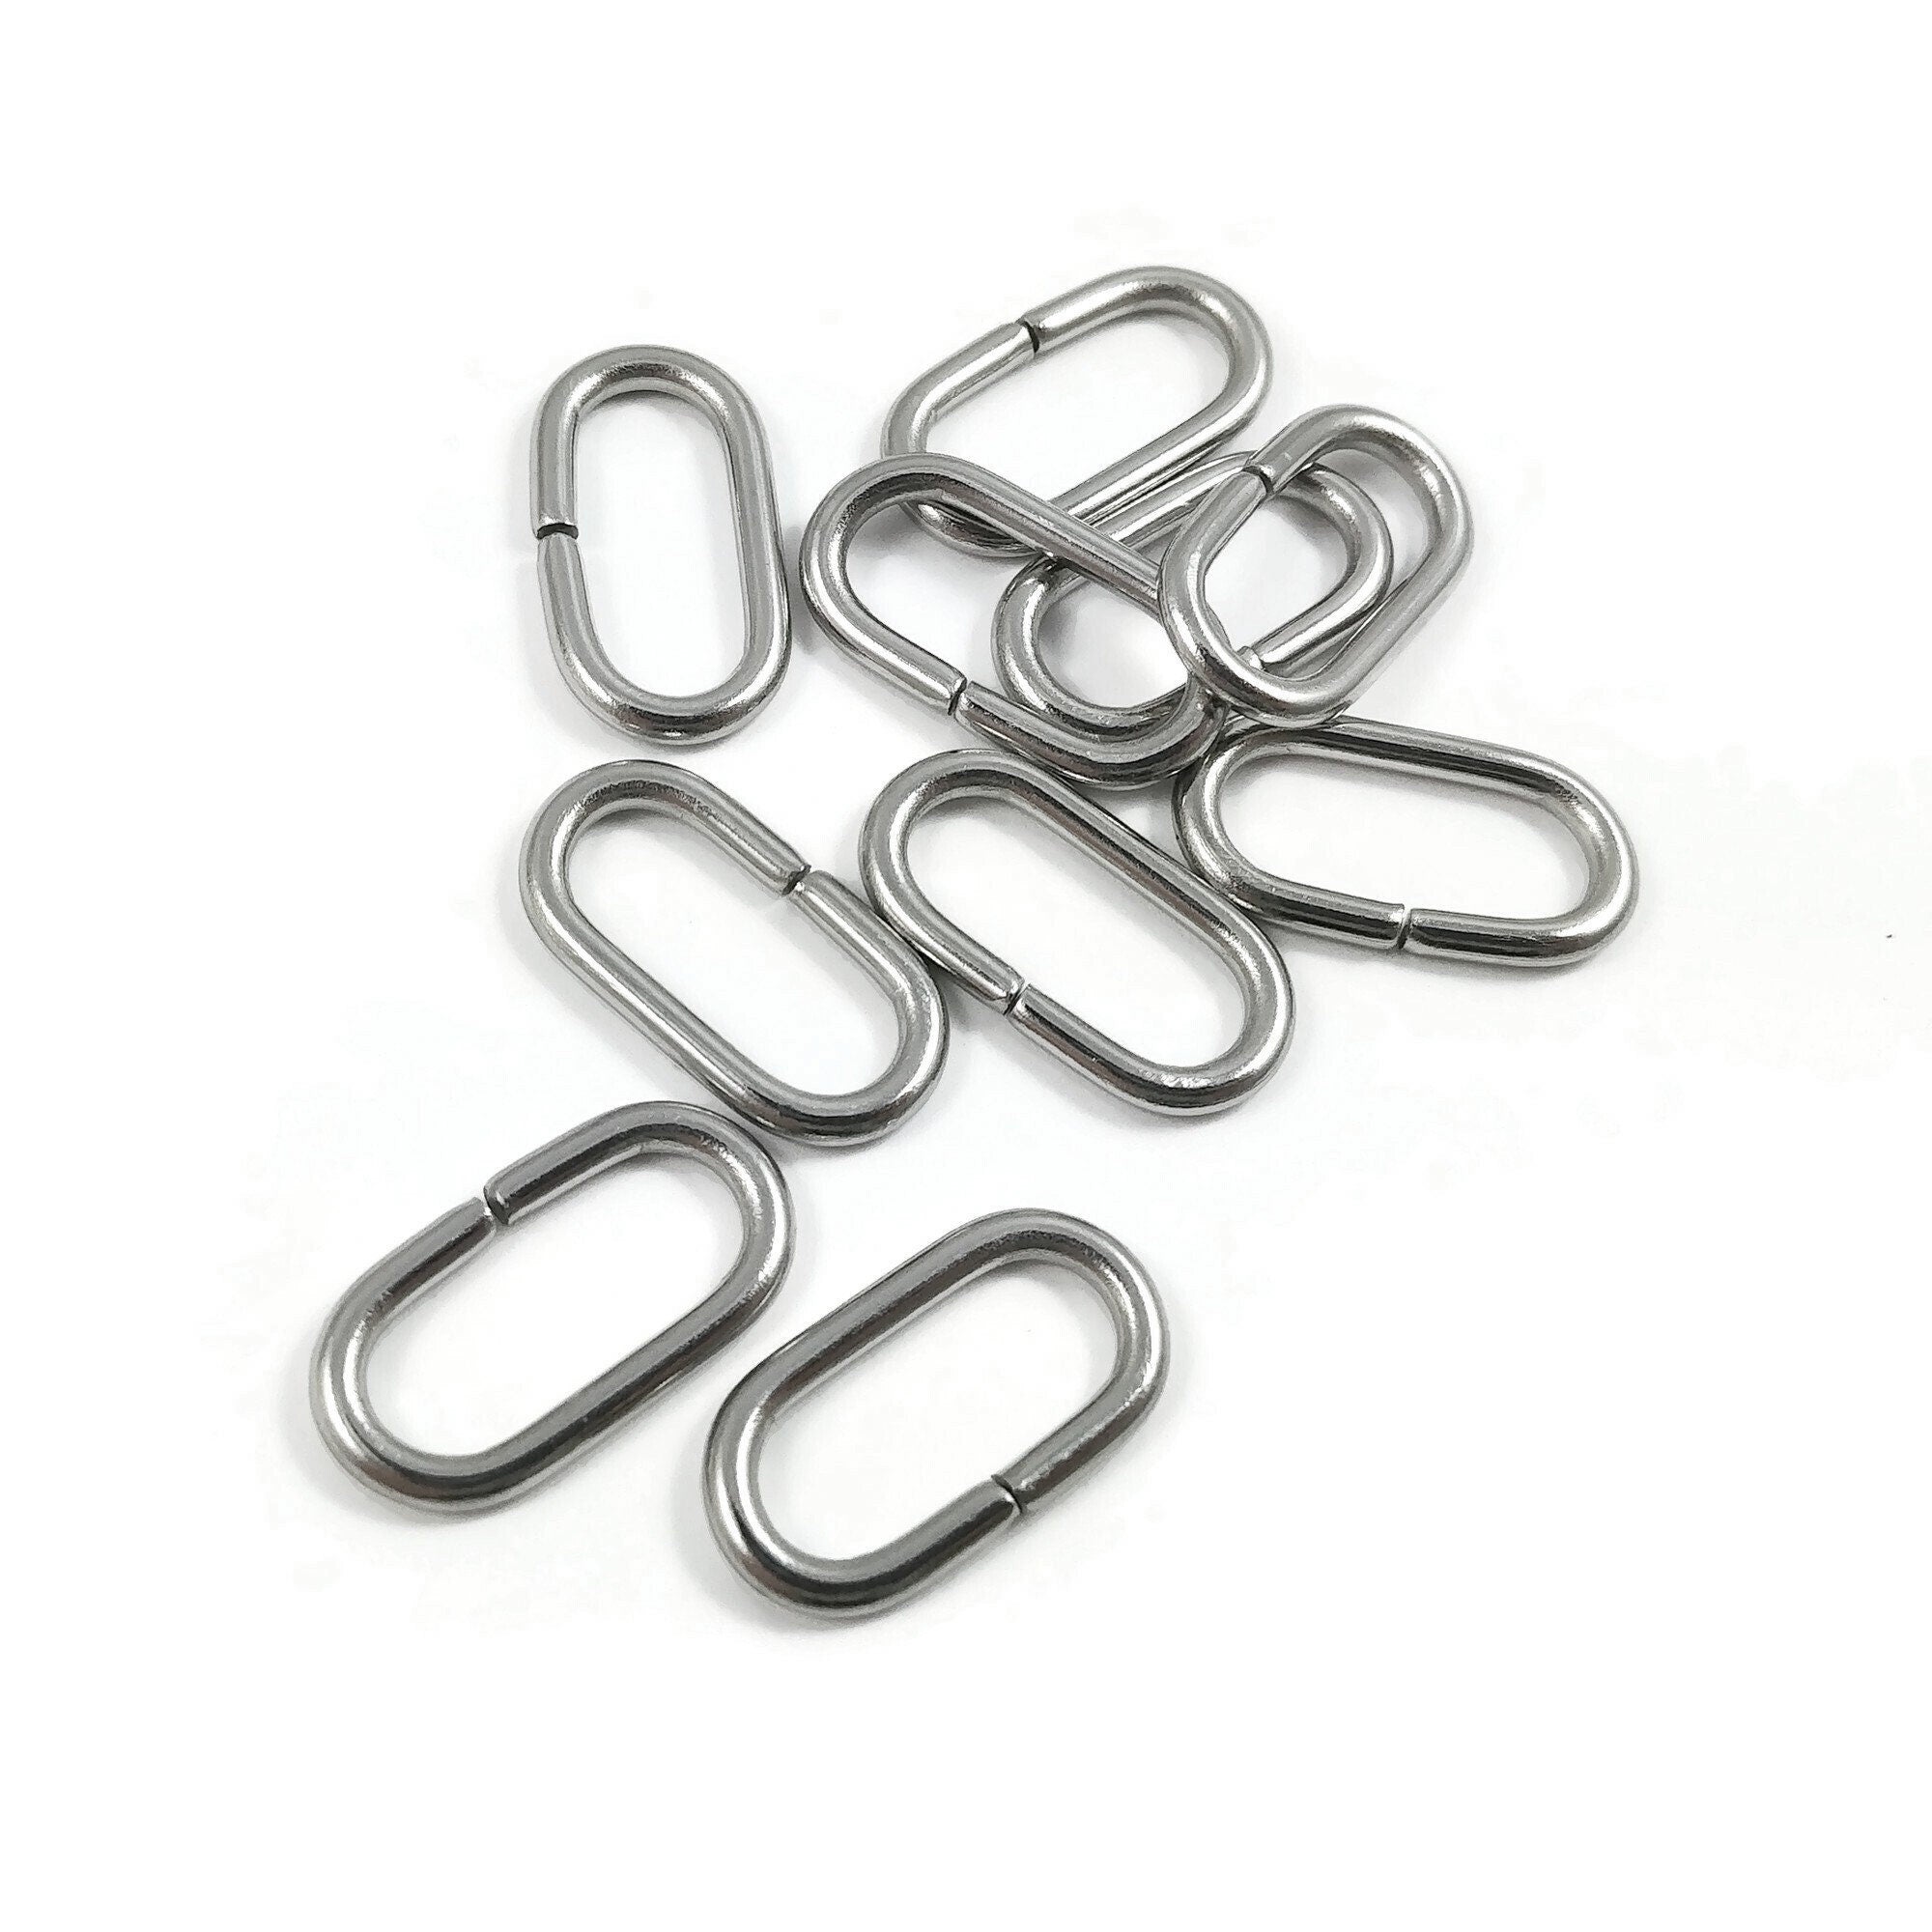 100, 500 or 1,000 Pieces: 8 mm Black Enamel Coated Open Jump Rings, 18g